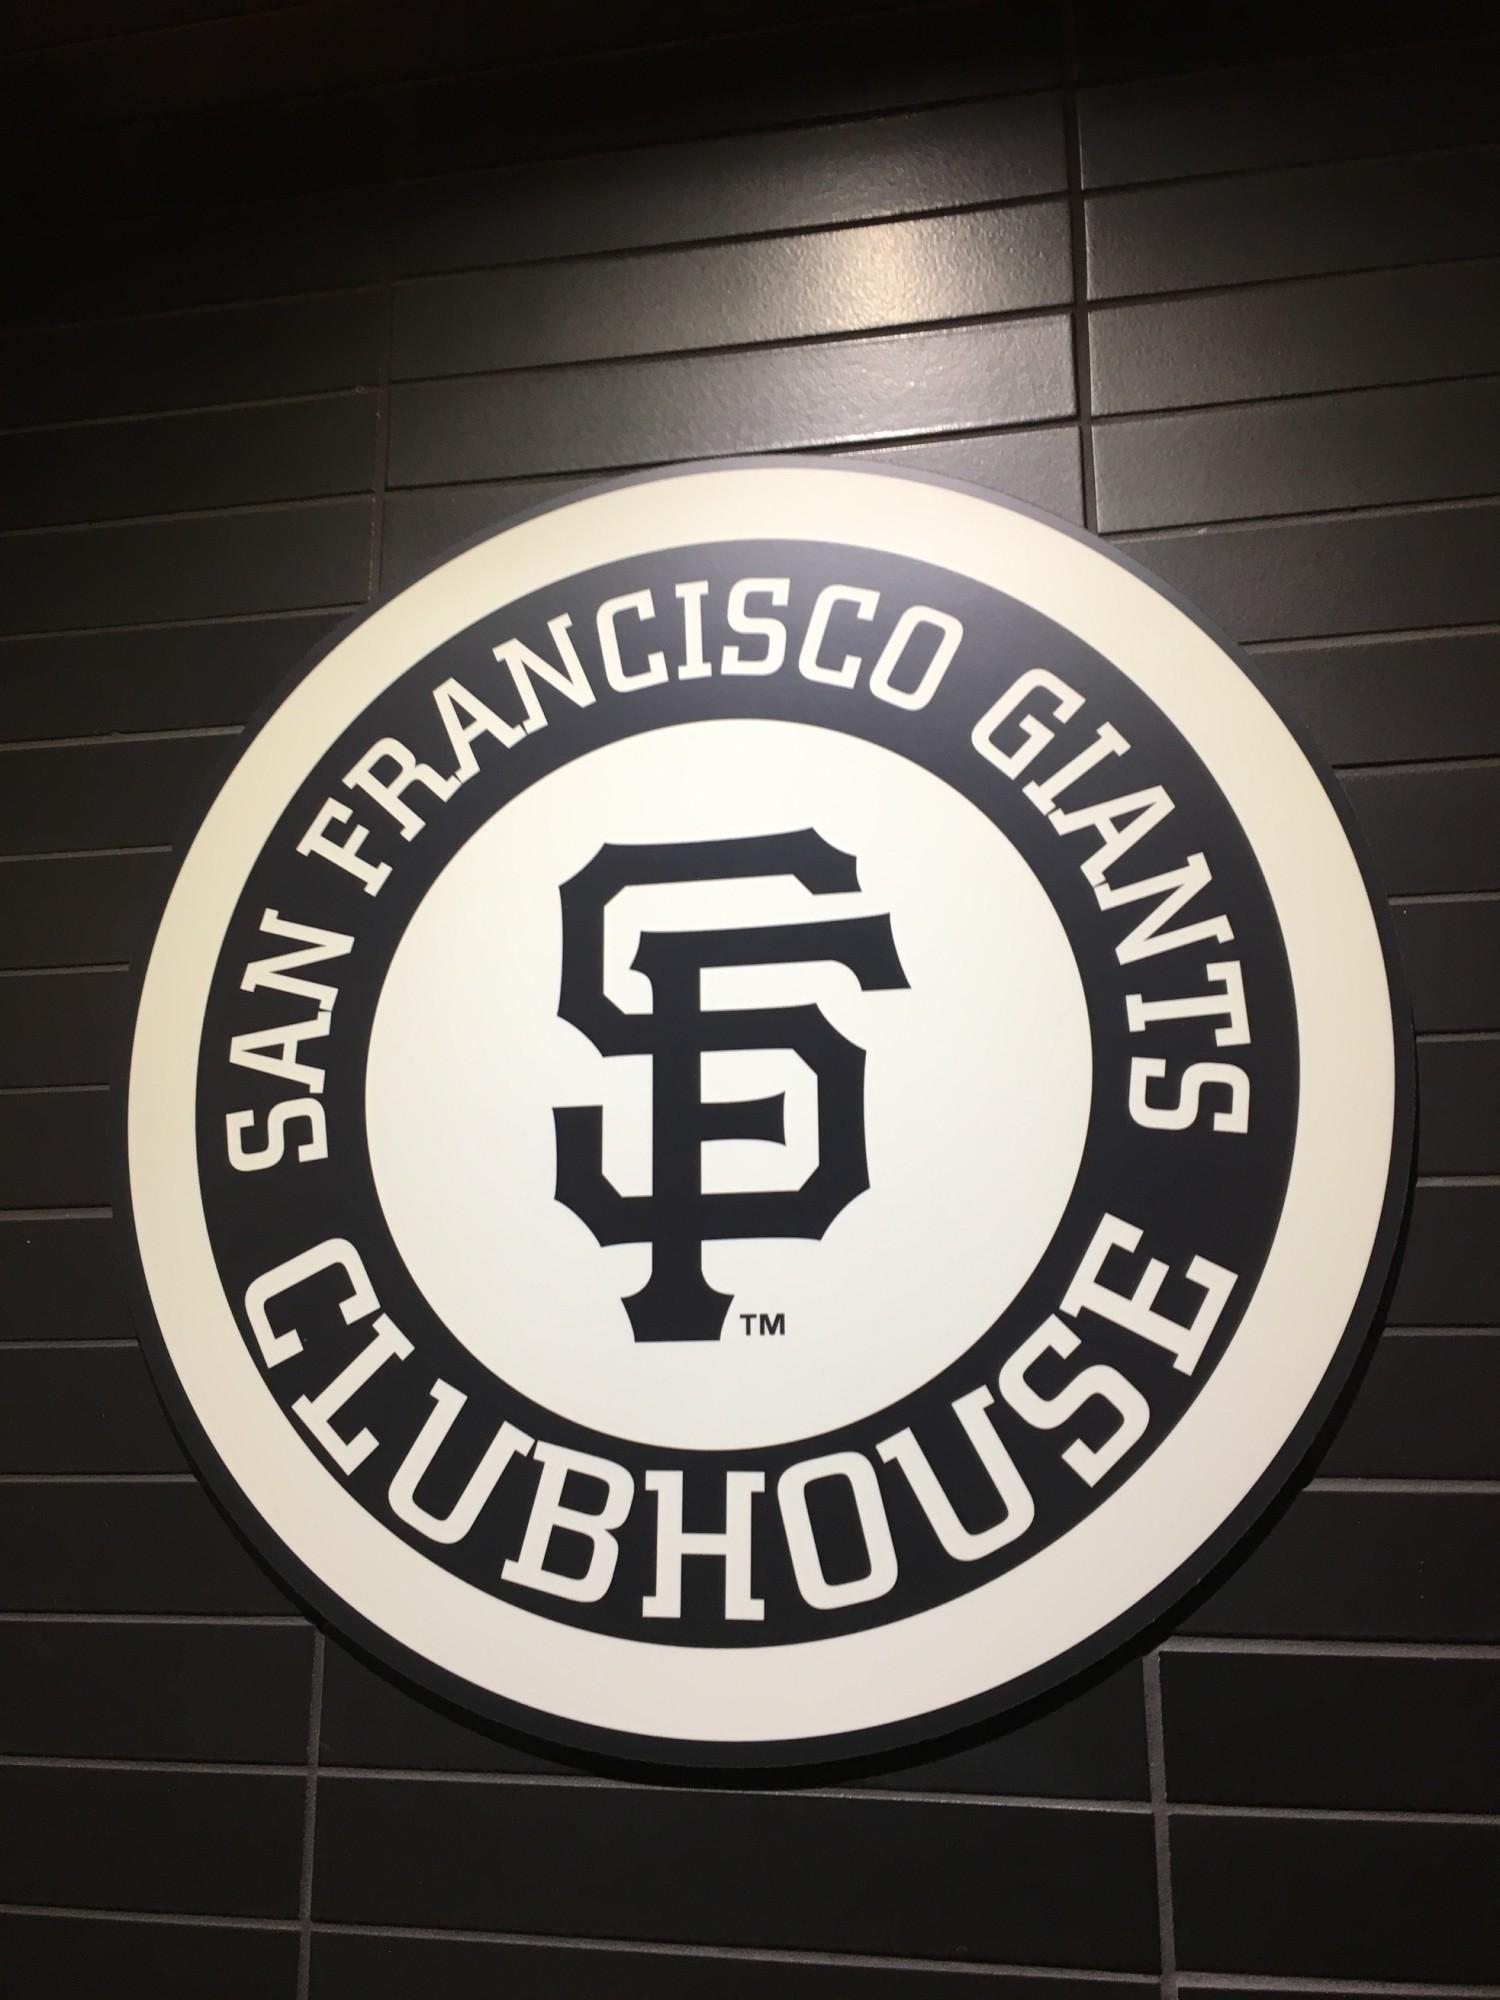 UA5670 SFO to PHX - San Francisco Giants Clubhouse Restaurant in